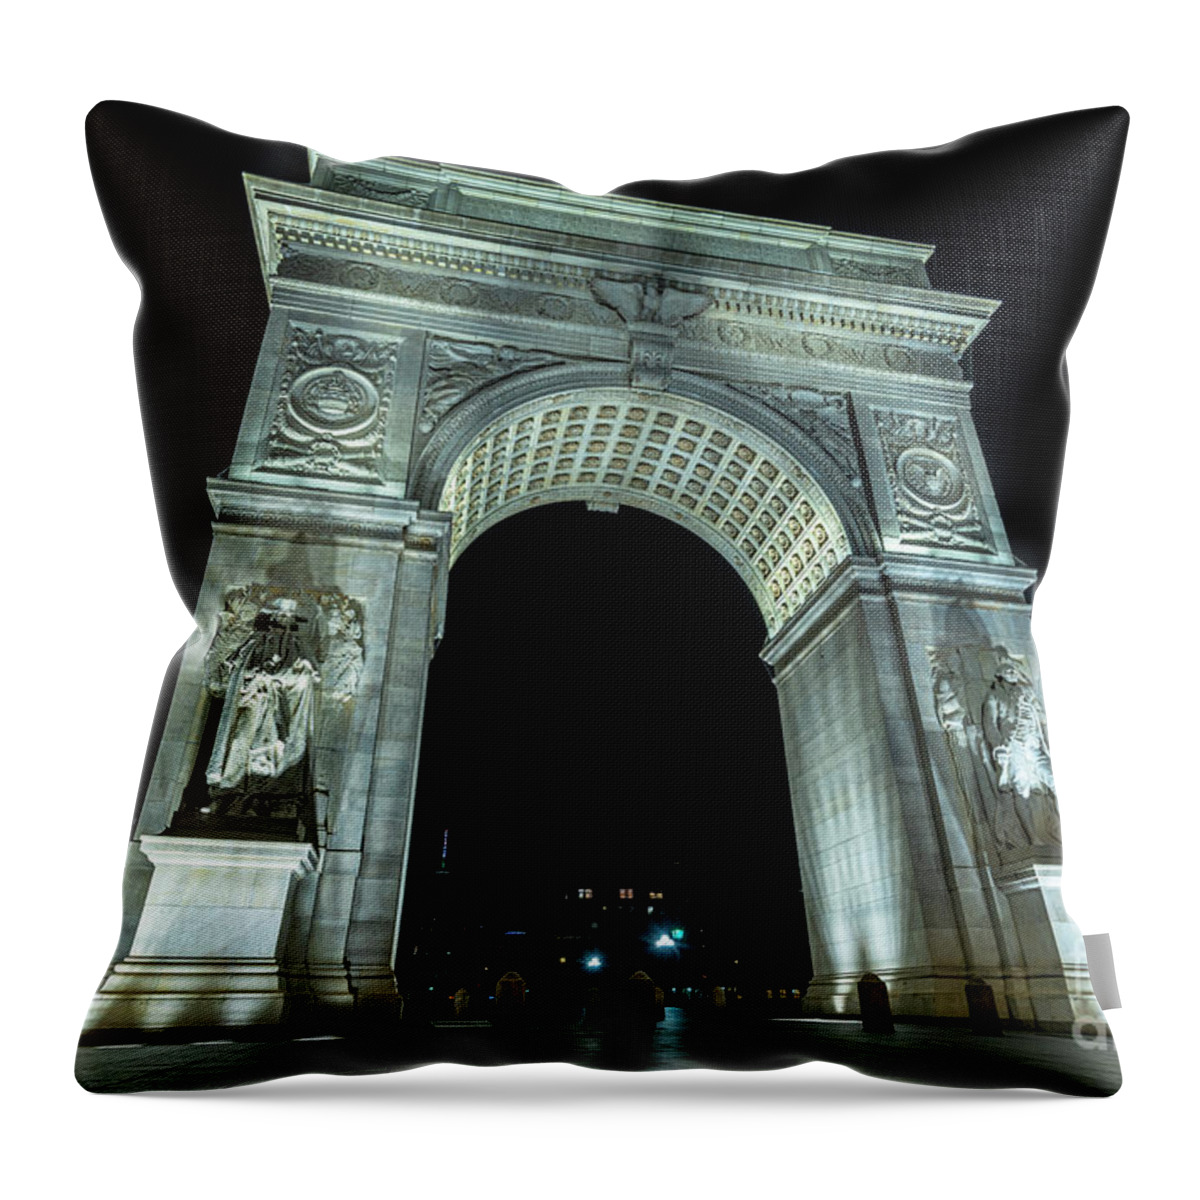 1892 Throw Pillow featuring the photograph Washington Square Arch The North Face by Stef Ko